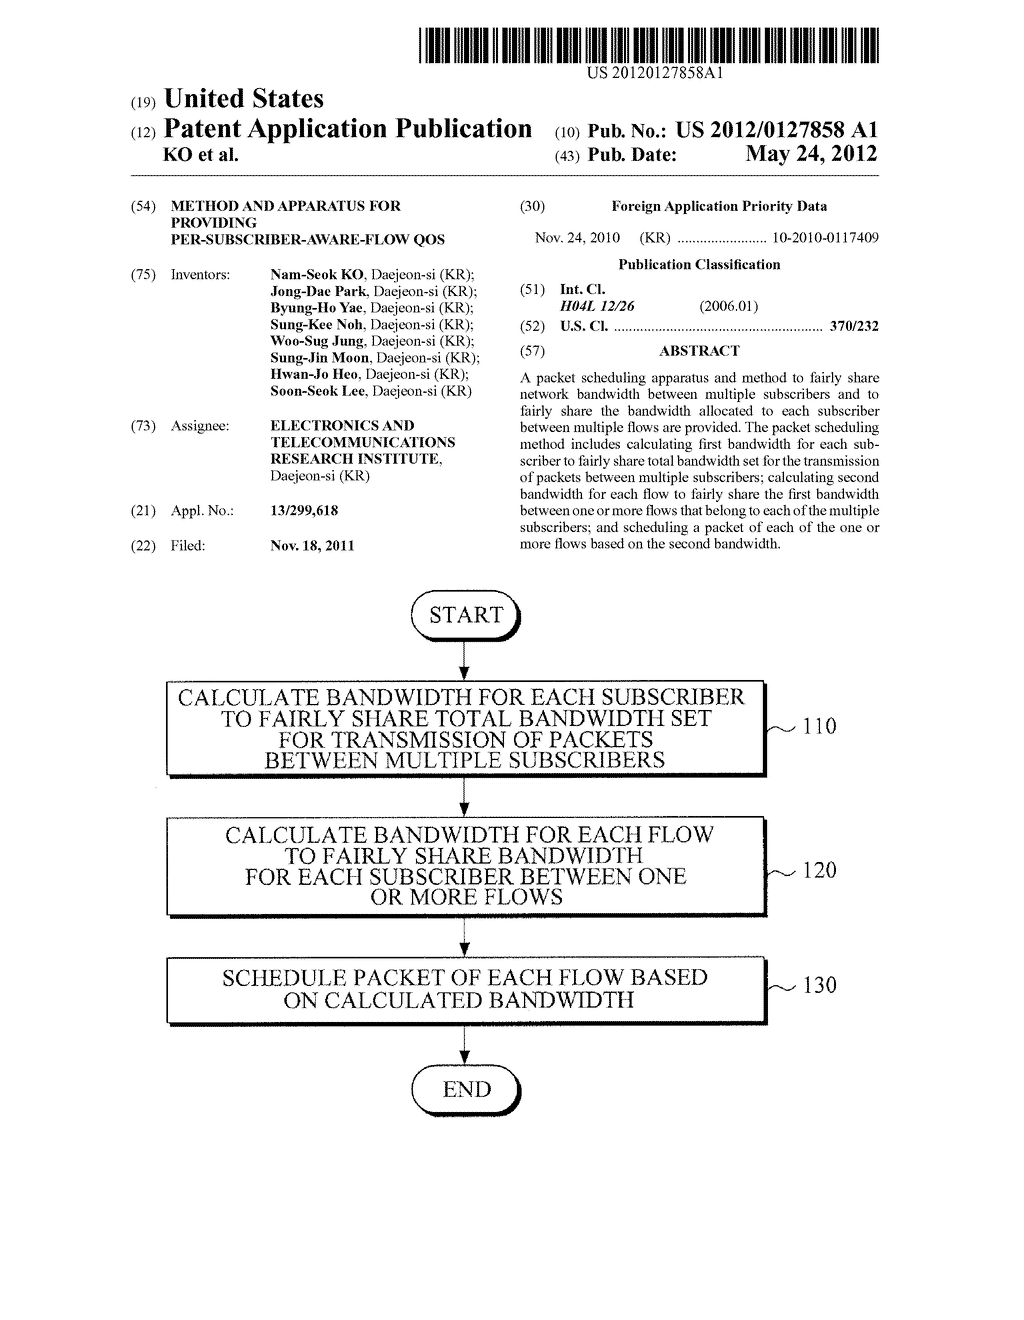 METHOD AND APPARATUS FOR PROVIDING PER-SUBSCRIBER-AWARE-FLOW QOS - diagram, schematic, and image 01